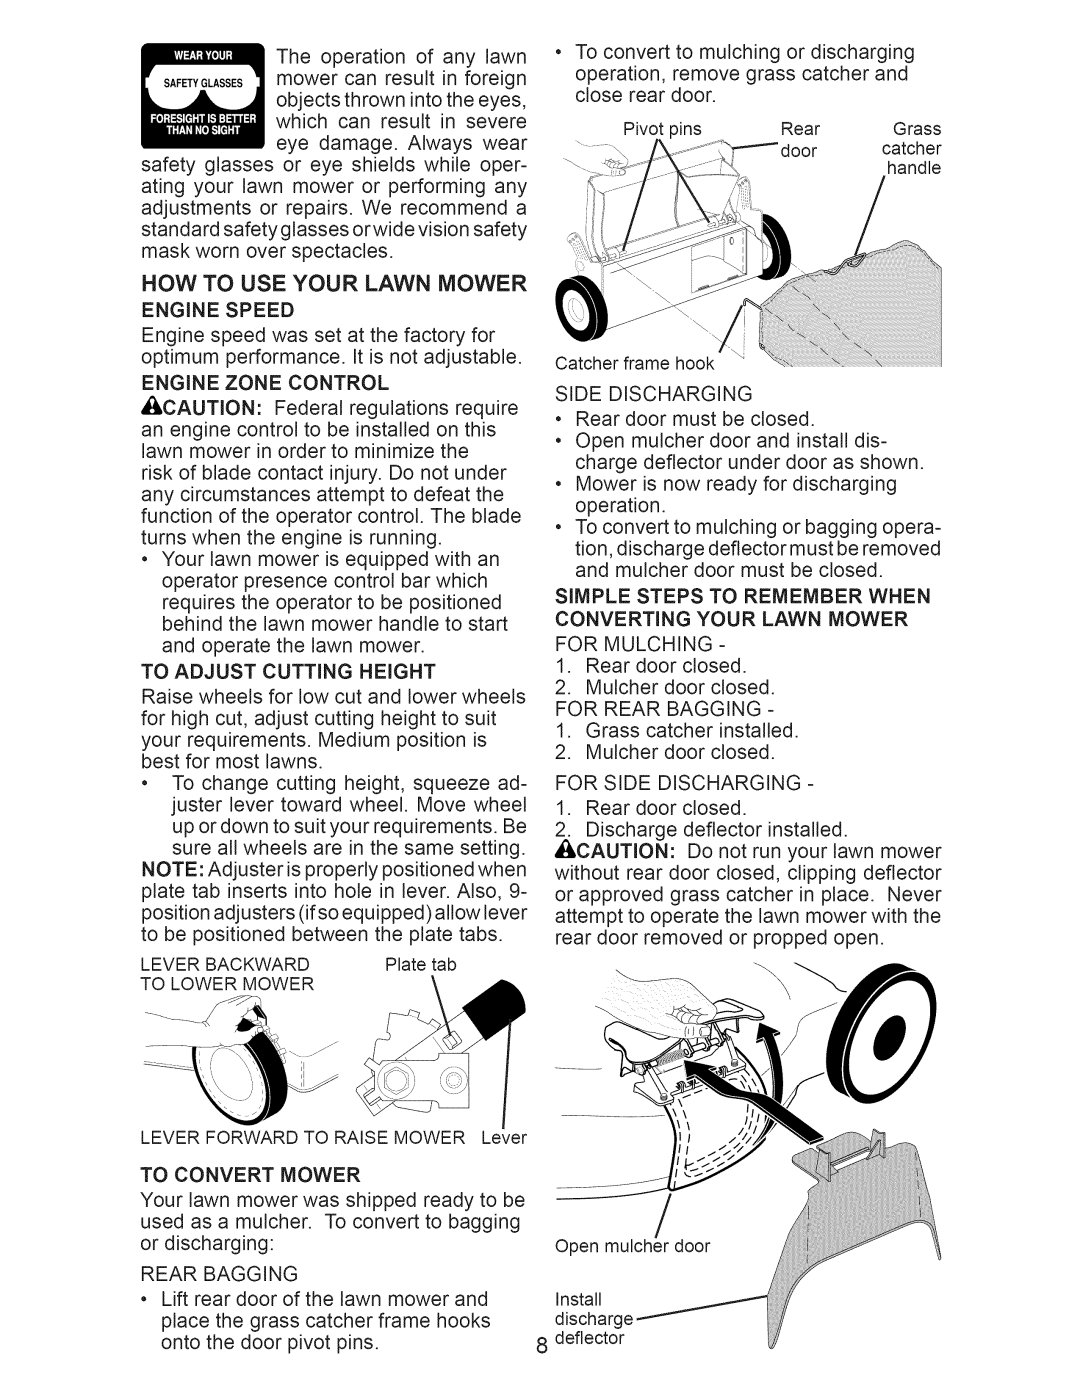 Craftsman 917.389051 manual How To Use Your Lawn Mower, Converting Your Lawn Mower 